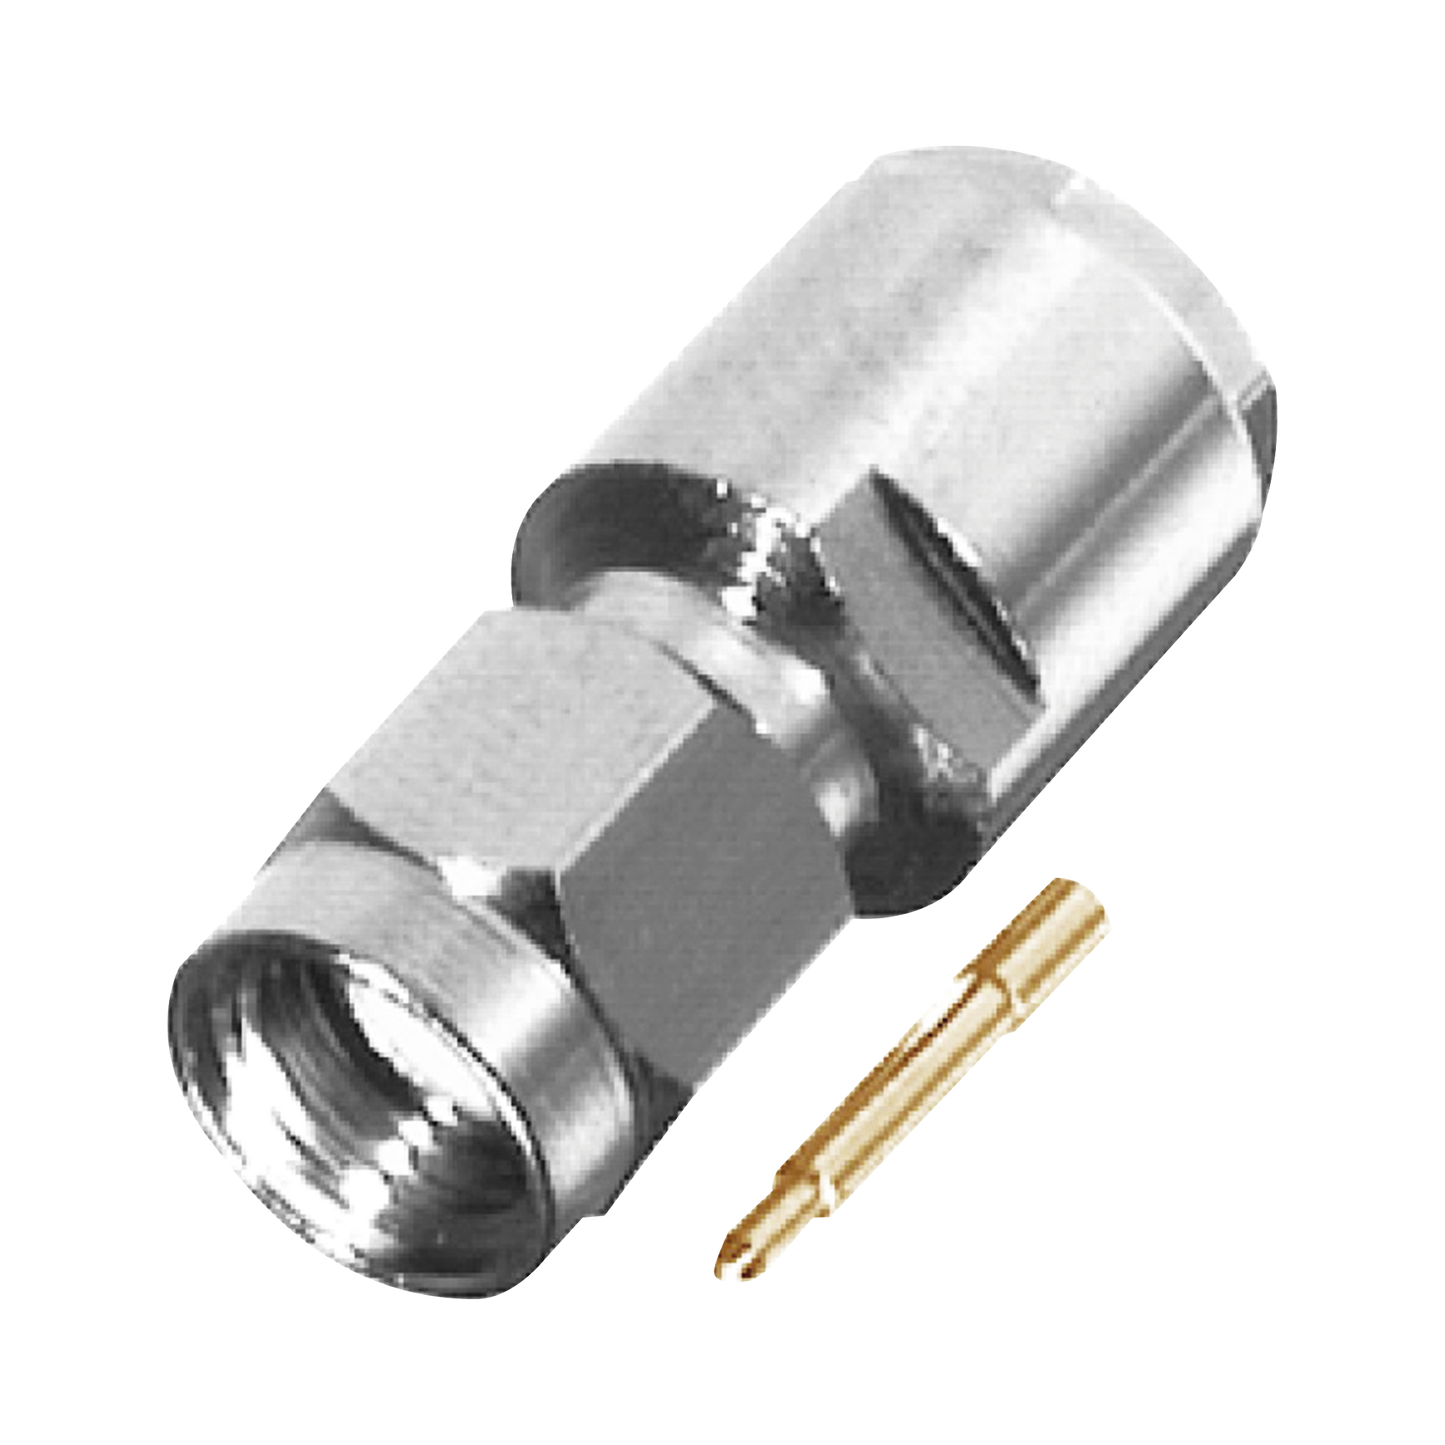 SMA Male Connector to Clamp on RG-58/U, LMR-195, Cable Group C, Nickel/ Gold/ PTFE.